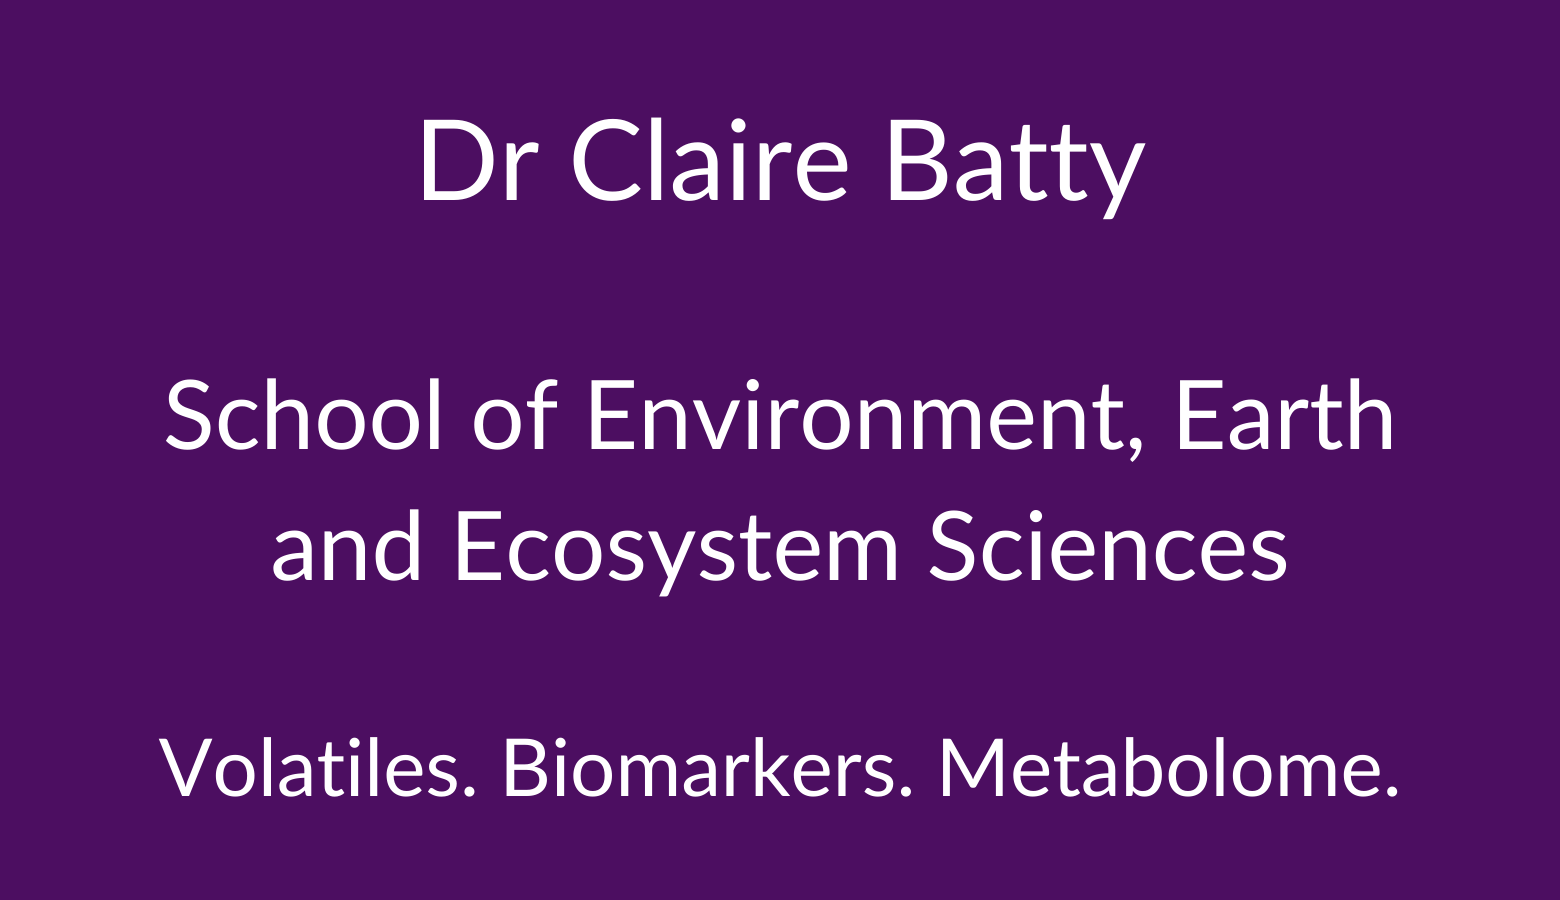 Dr Claire Batty. School of Environment, Earth and Ecosystem Sciences. Volatiles. Biomarkers. Metabolome.